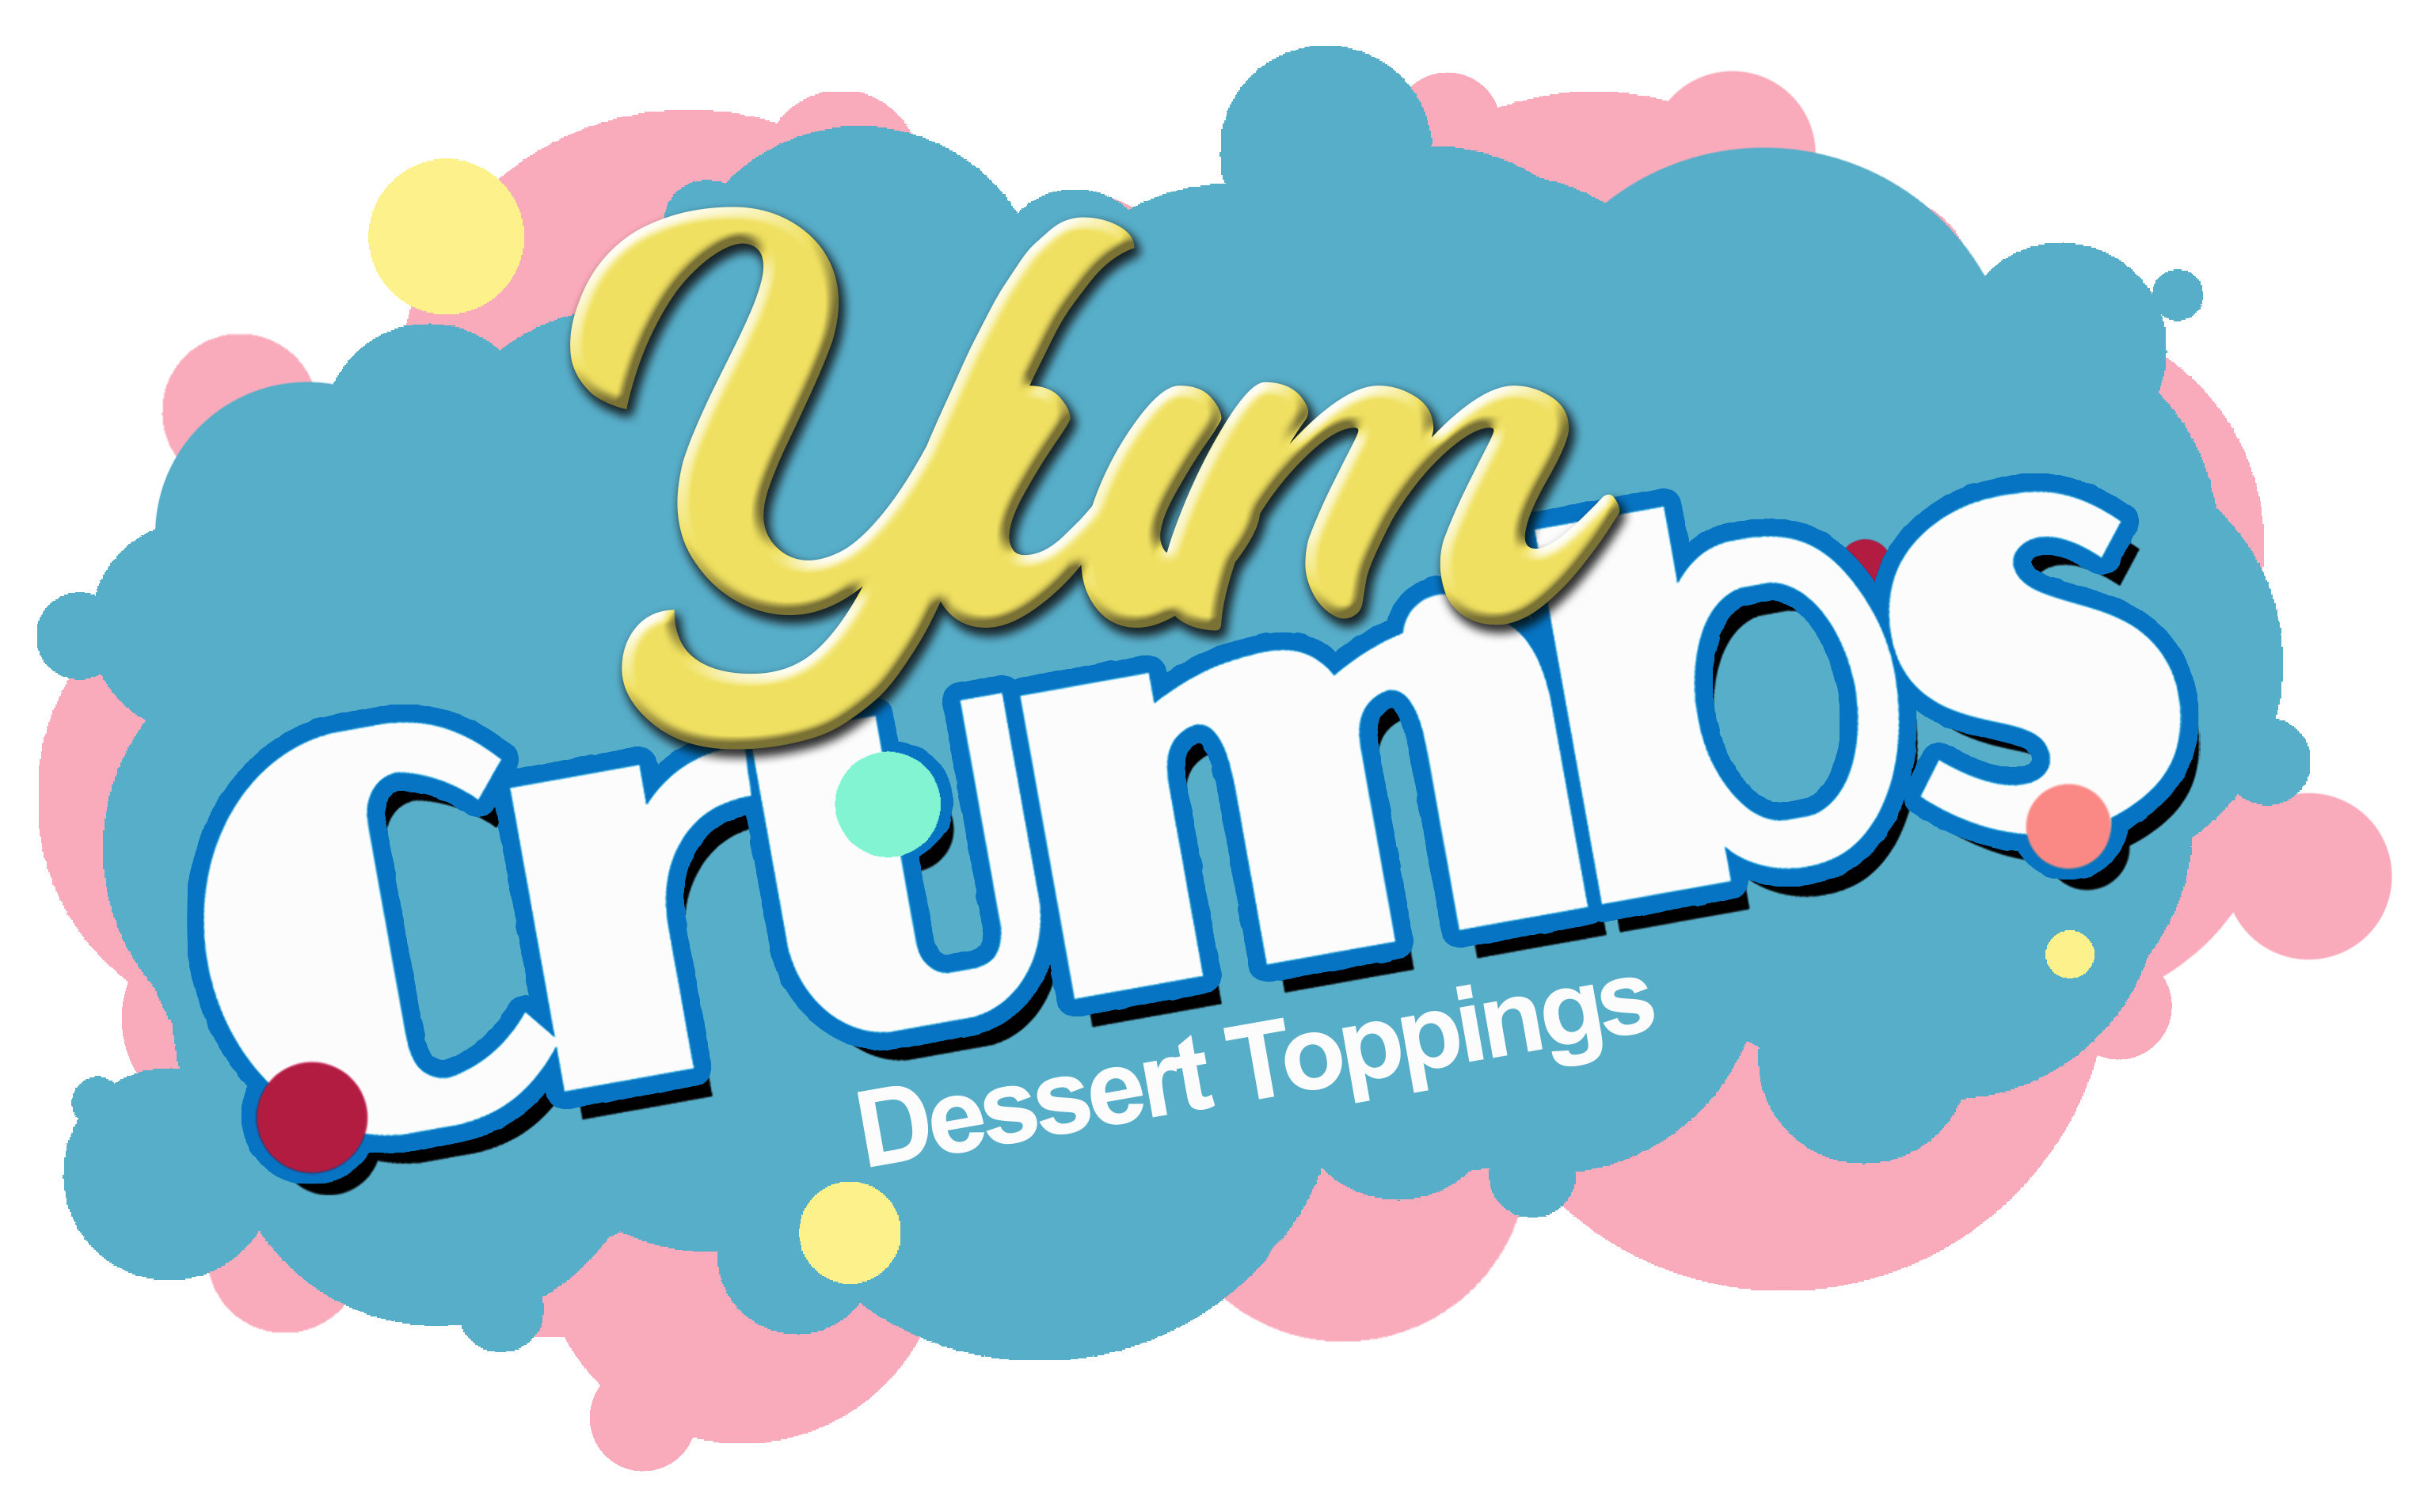 Yum Crumbs- Delicious dessert toppings